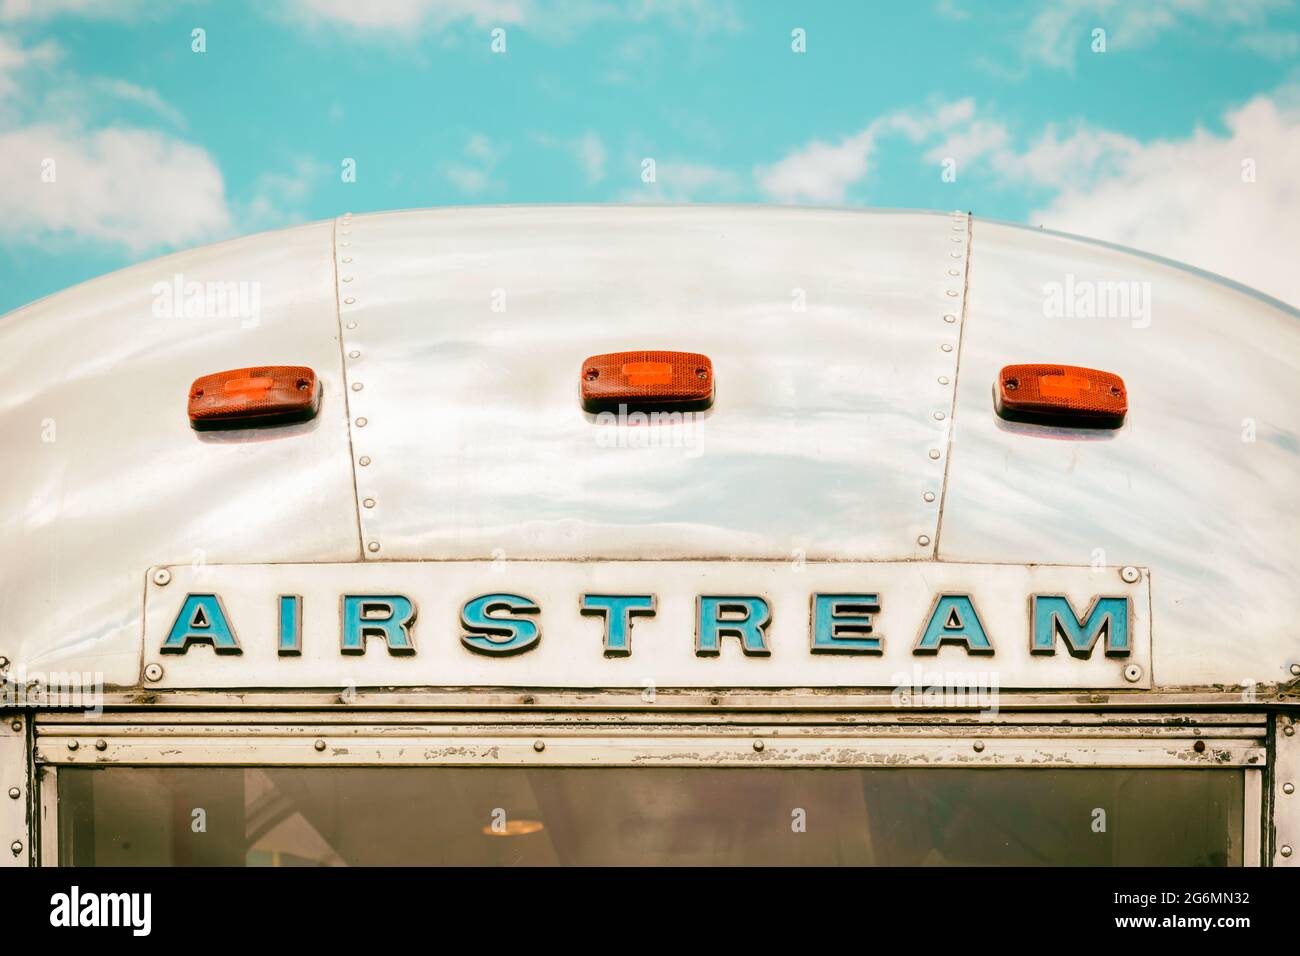 Den Bosch, The Netherlands - May 12, 2019: Rear end of a vintage Airstream aluminum camper trailer in Den Bosch, The Netherlands Stock Photo